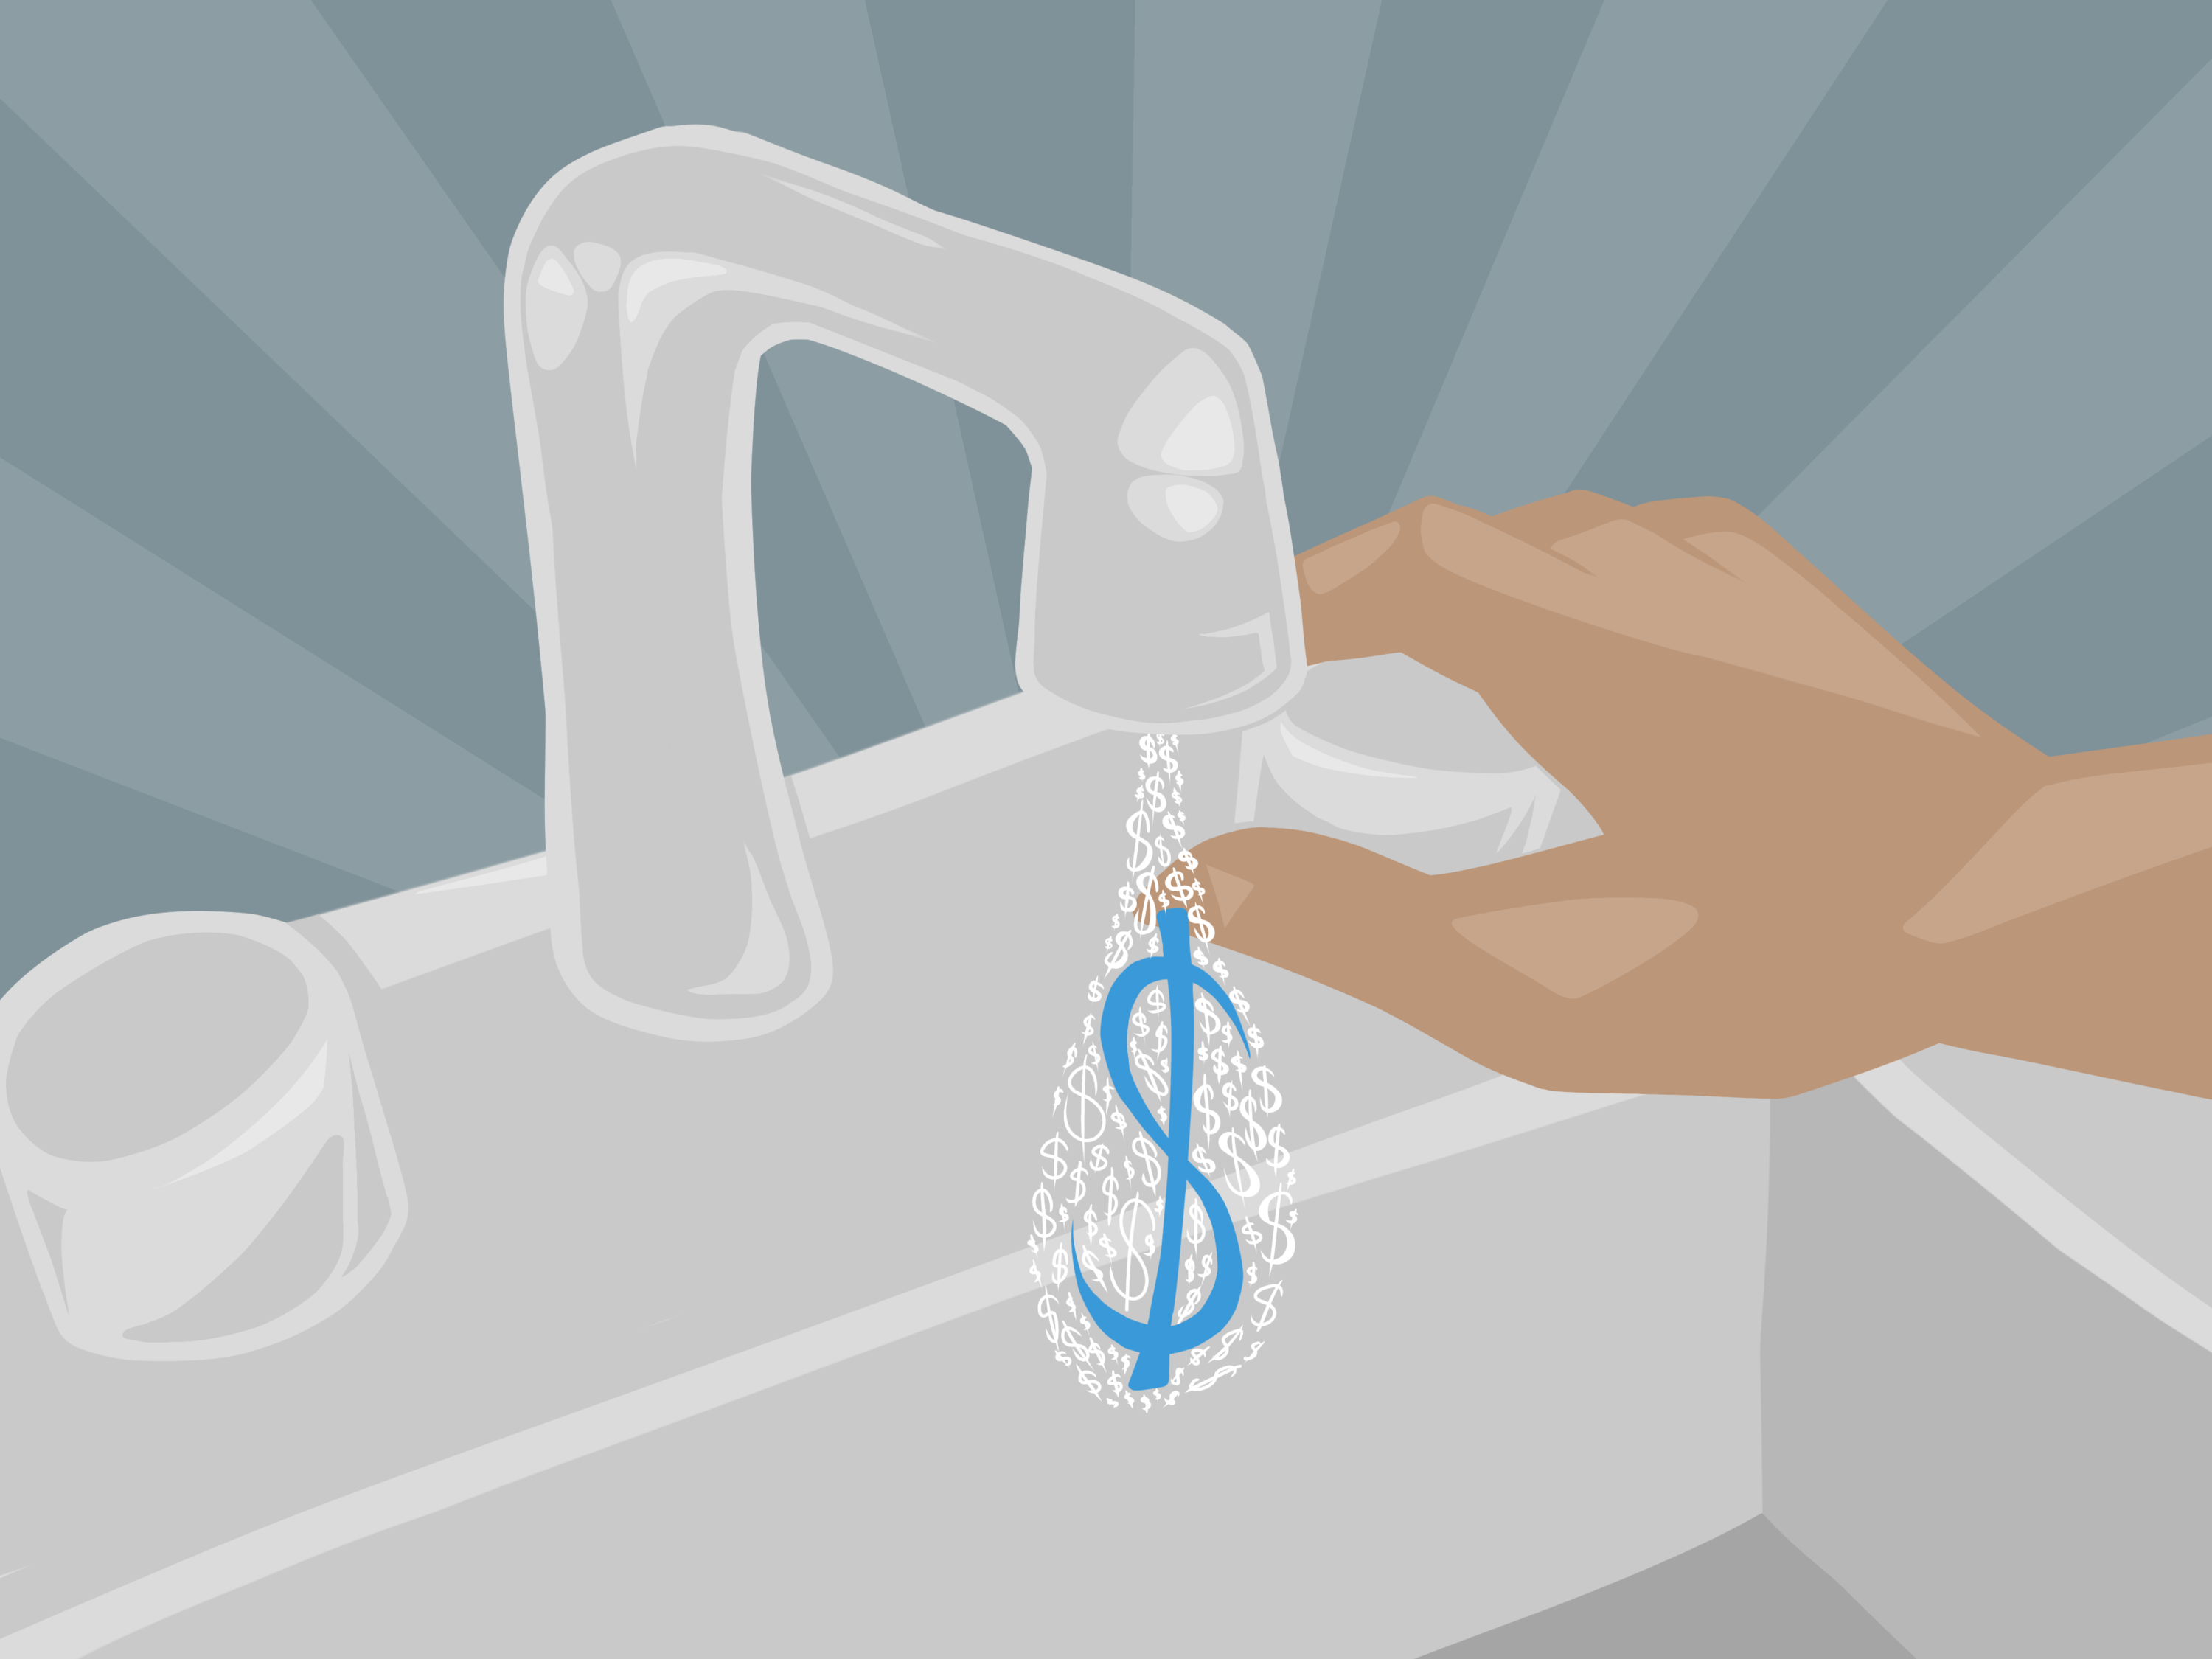 illustration of tap with dollar sign dripping out of it